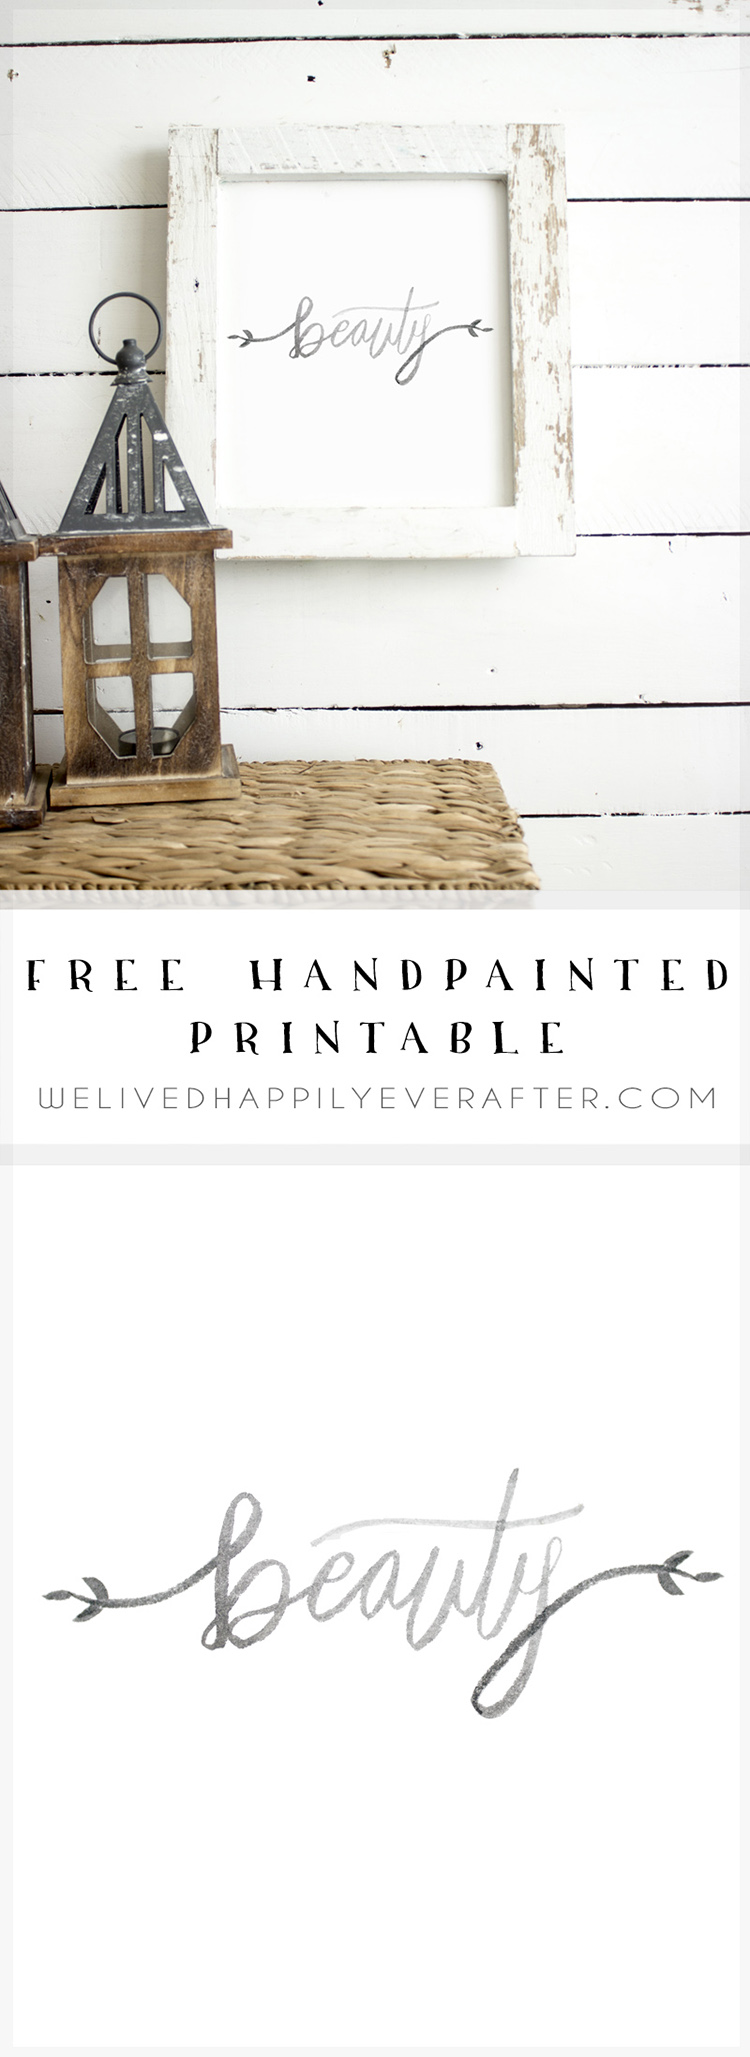 Free Handlettered Watercolor Fixer Upper Inspired Printable "Beauty"